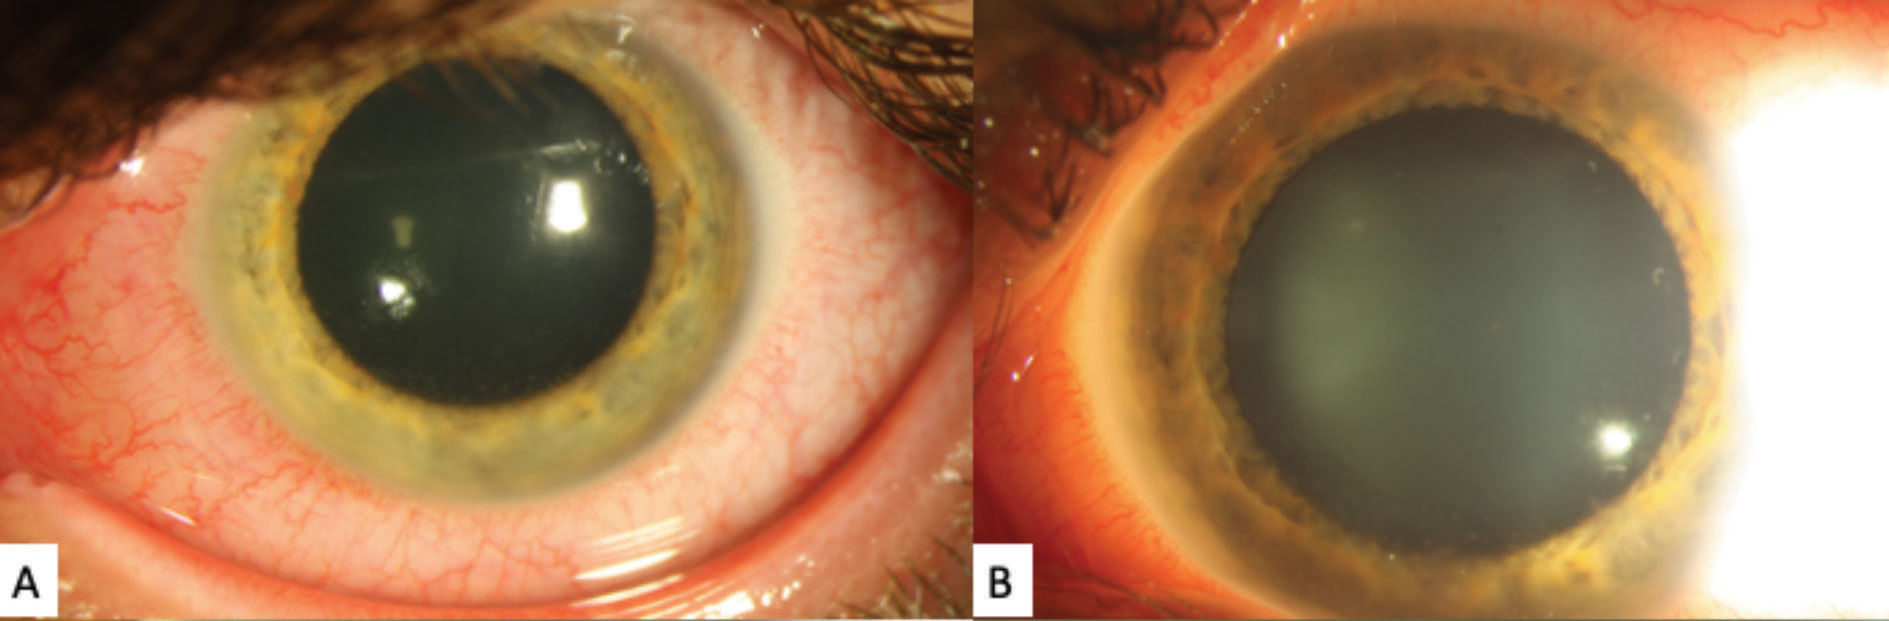 These gross external slit lamp photos of the patient’s left eye shows significant diffuse episcleral injection. A faint posterior corneal opacities can be see, although the detail is poor.